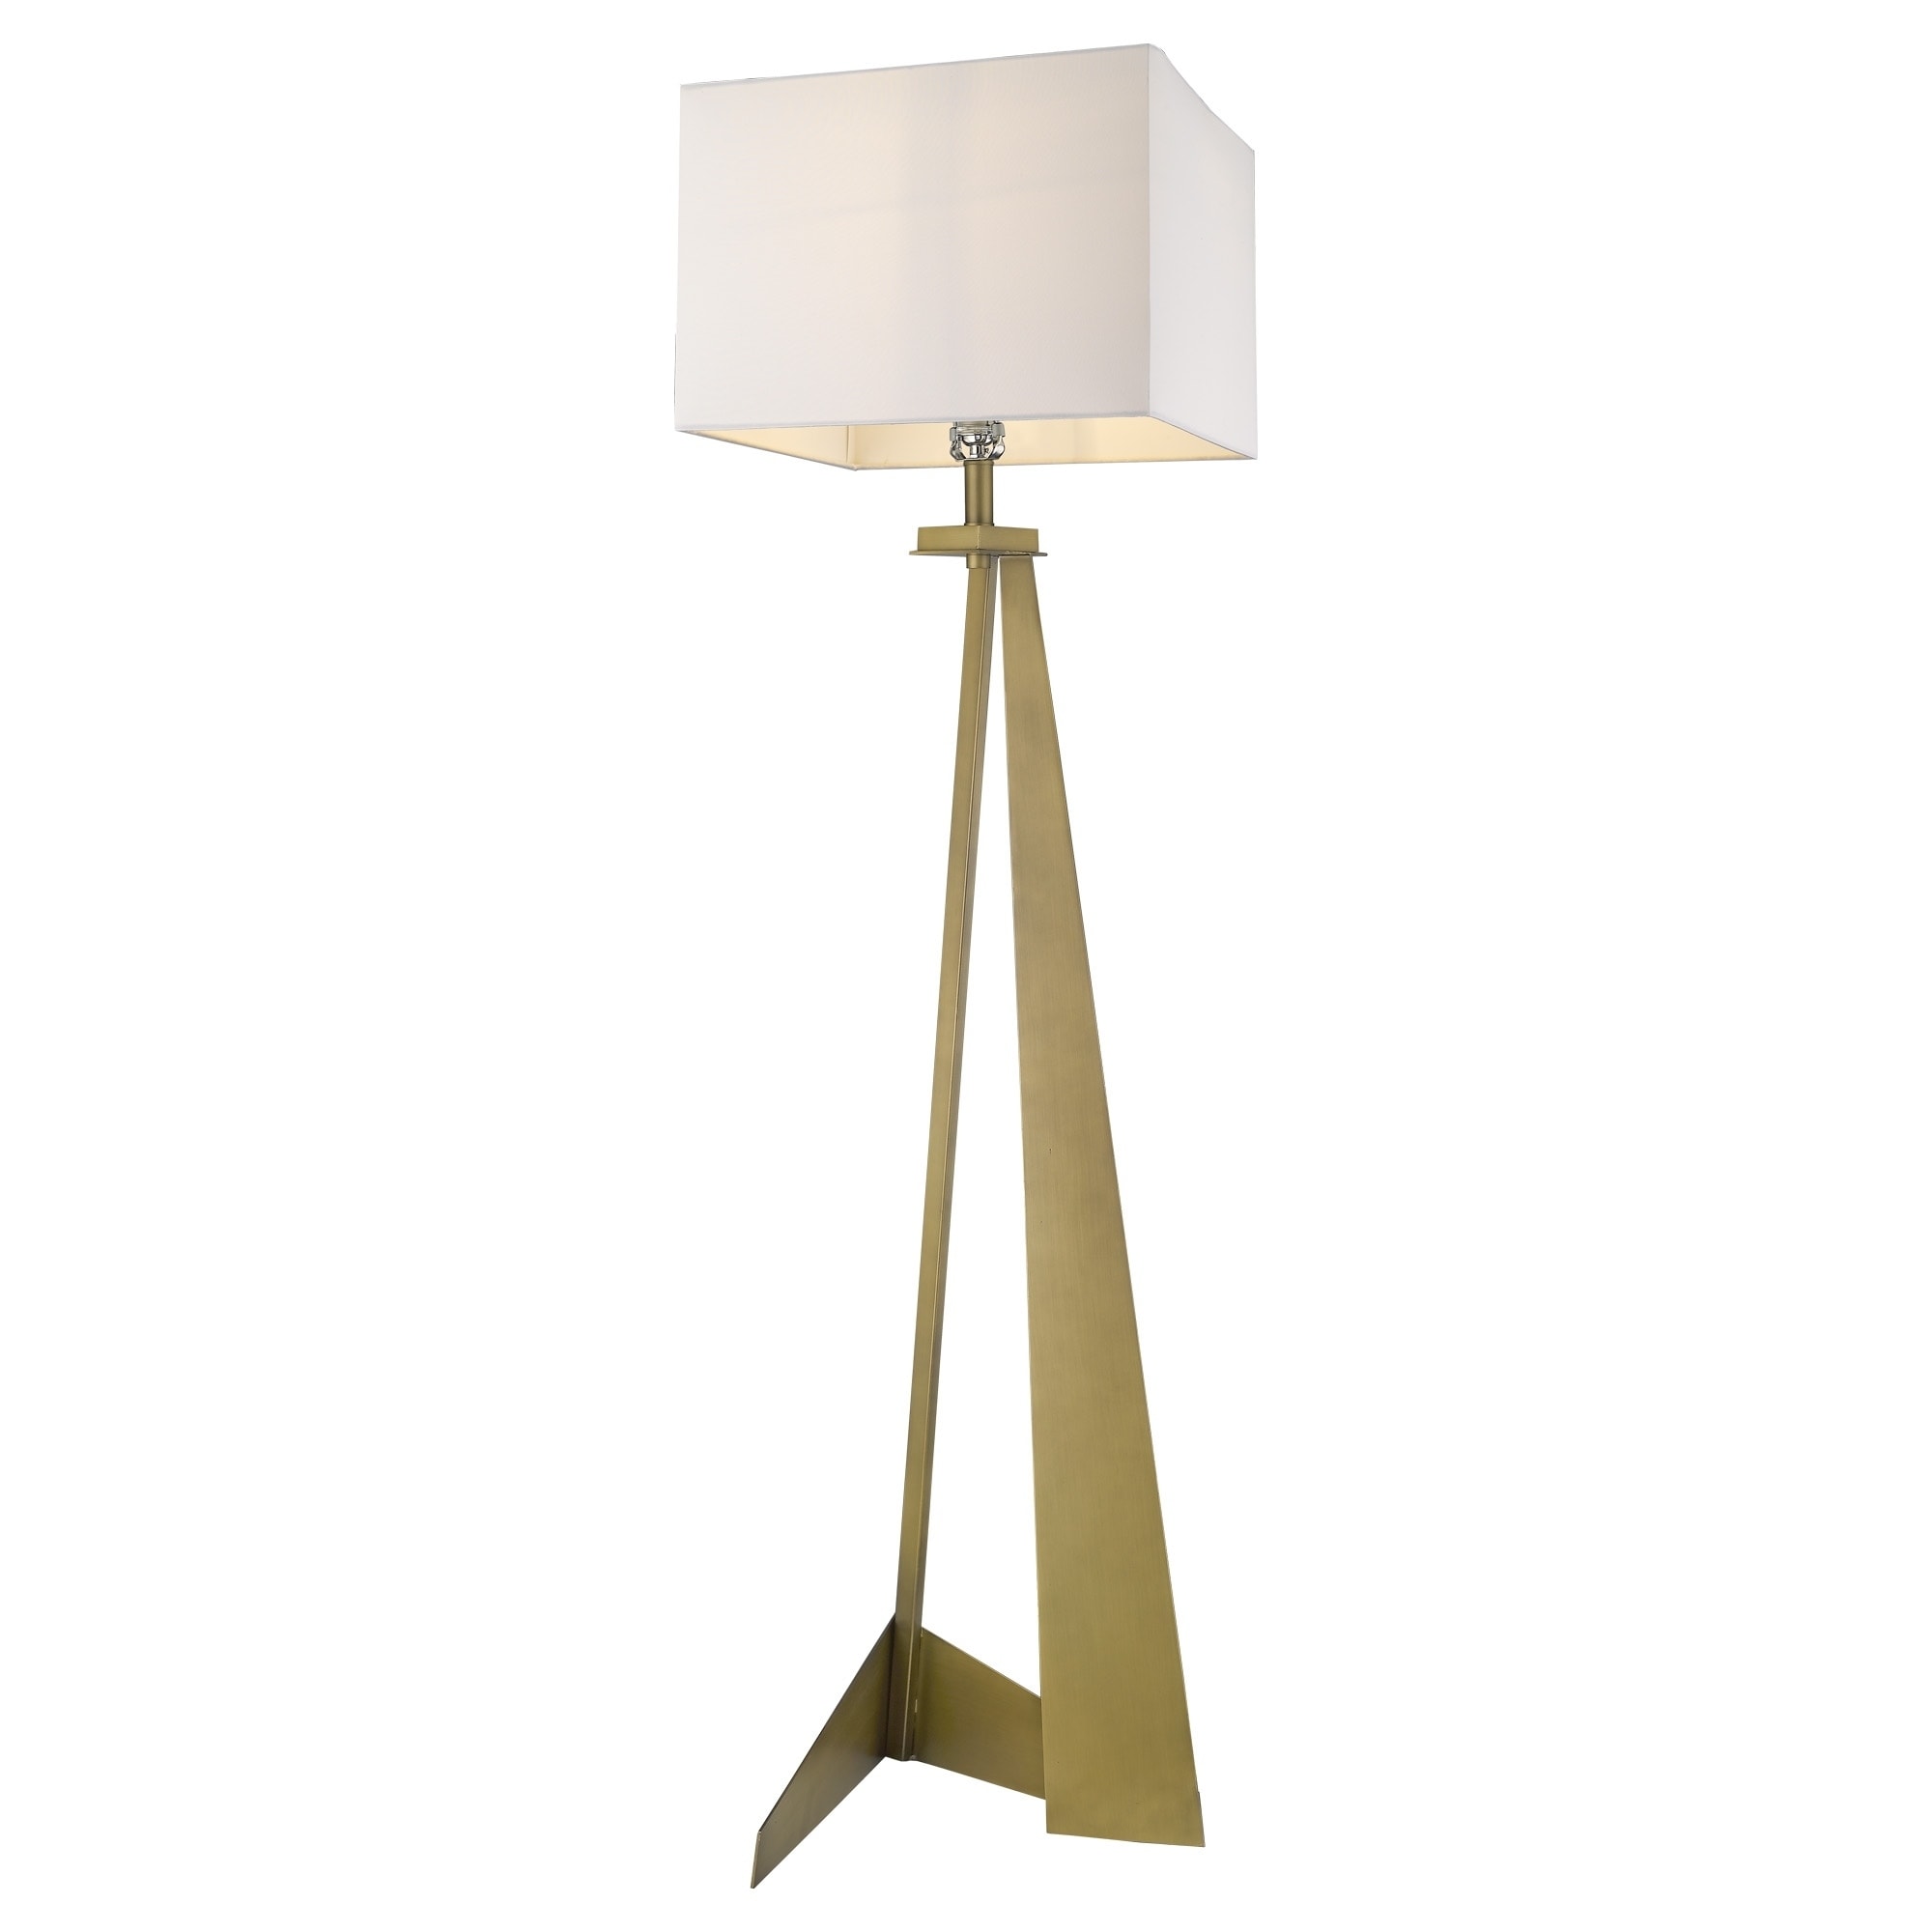 https://ak1.ostkcdn.com/images/products/28227904/Stratos-1-Light-Aged-Brass-Floor-Lamp-a66955bf-56e2-4821-a546-8ec9e1b25d5a.jpg